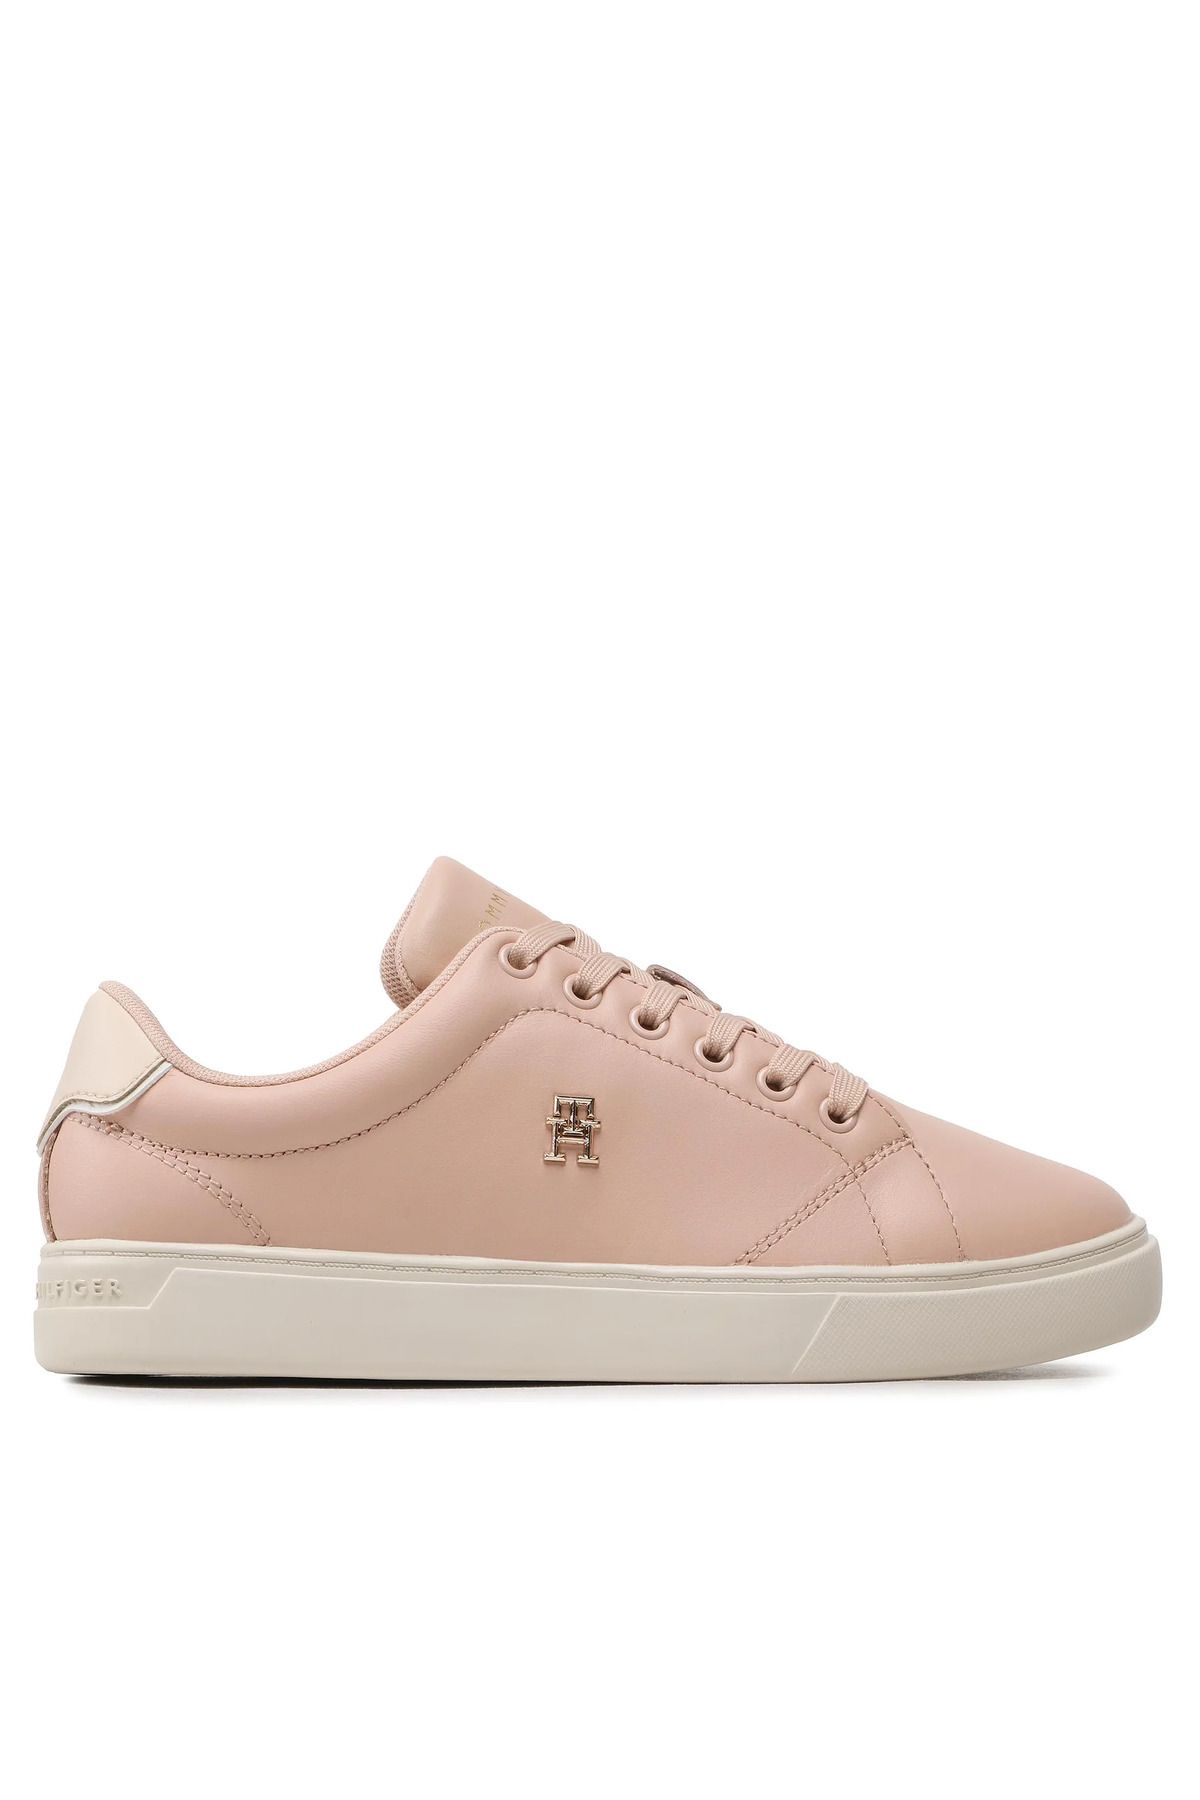 Tommy Hilfiger ELEVATED ESS COURT SNEAKER